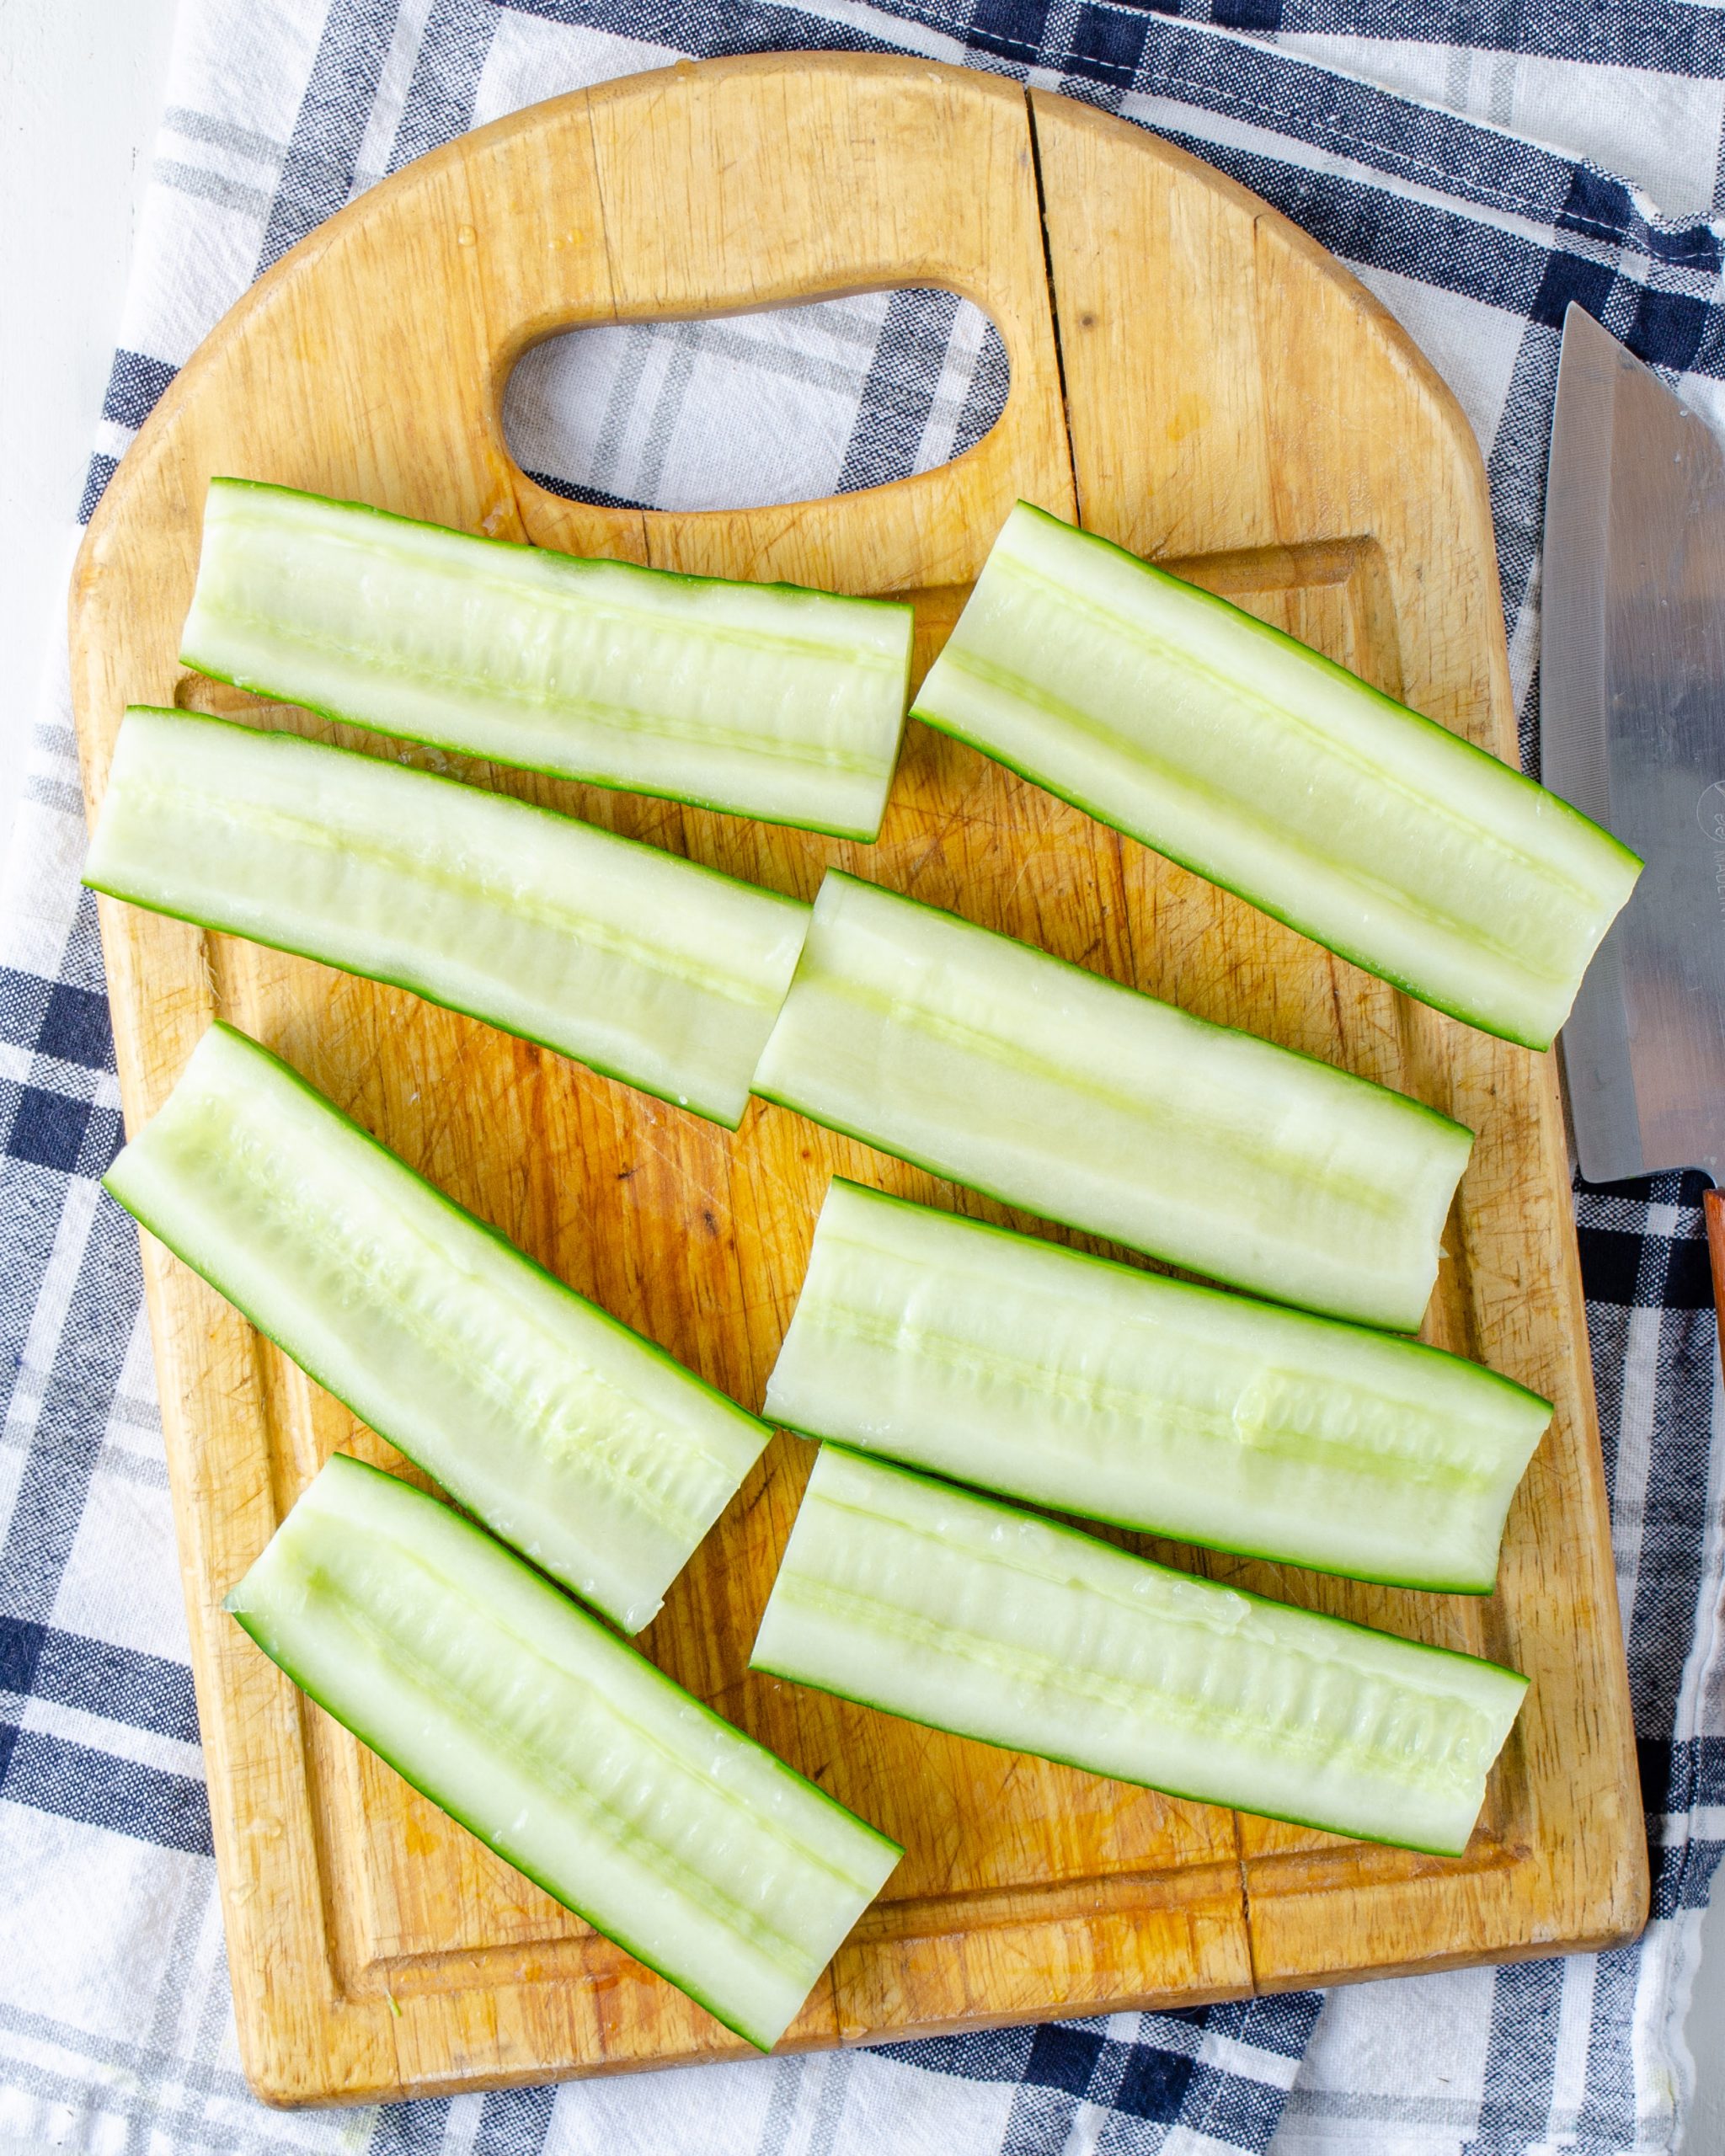 Then cut in half again the other way, so that each cucumber half created two slices of “bread” for each sandwich. 